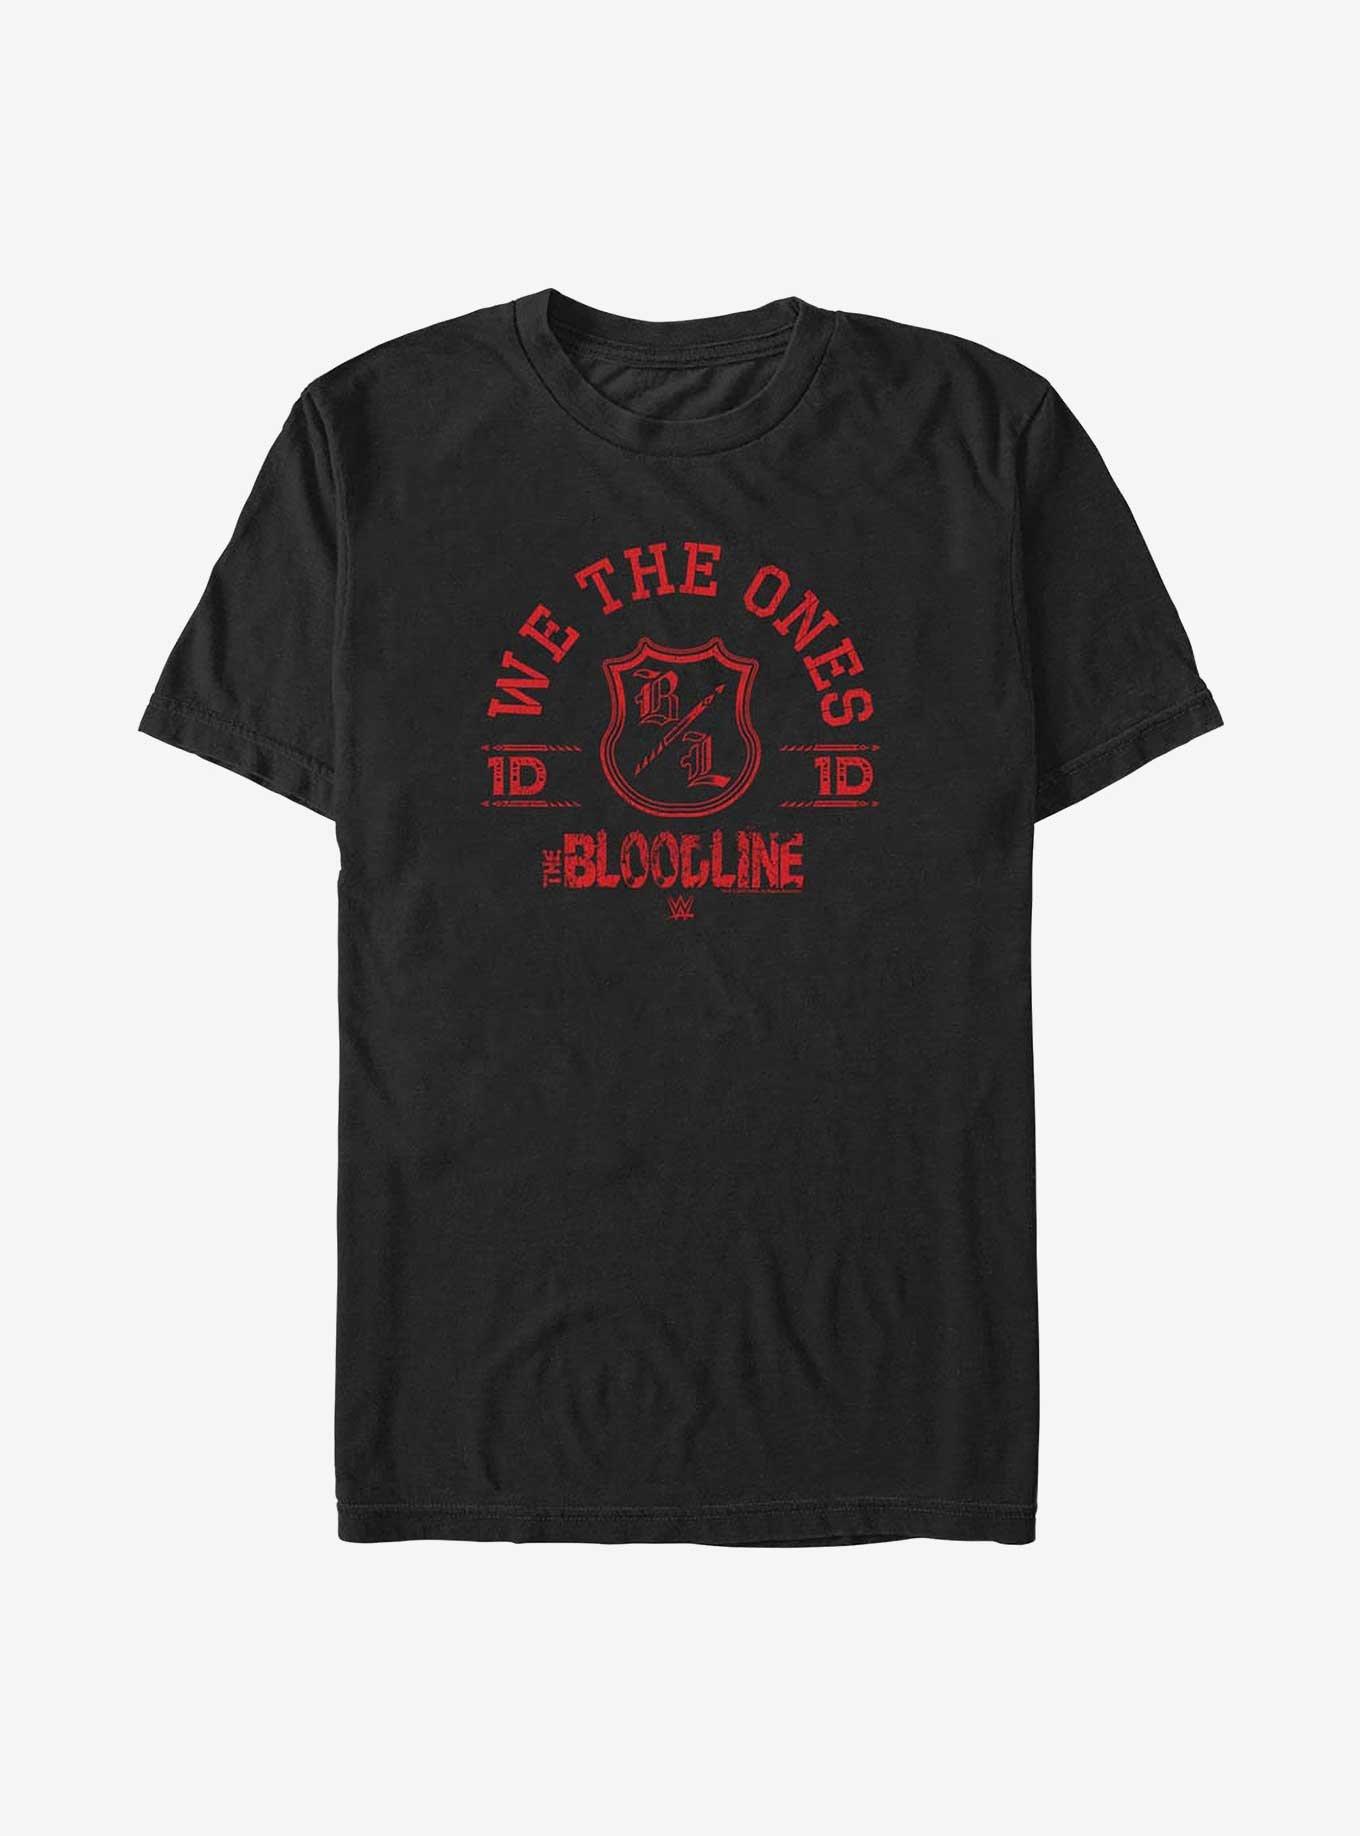 WWE The Bloodline We The Ones Collegiate Style T-Shirt, BLACK, hi-res